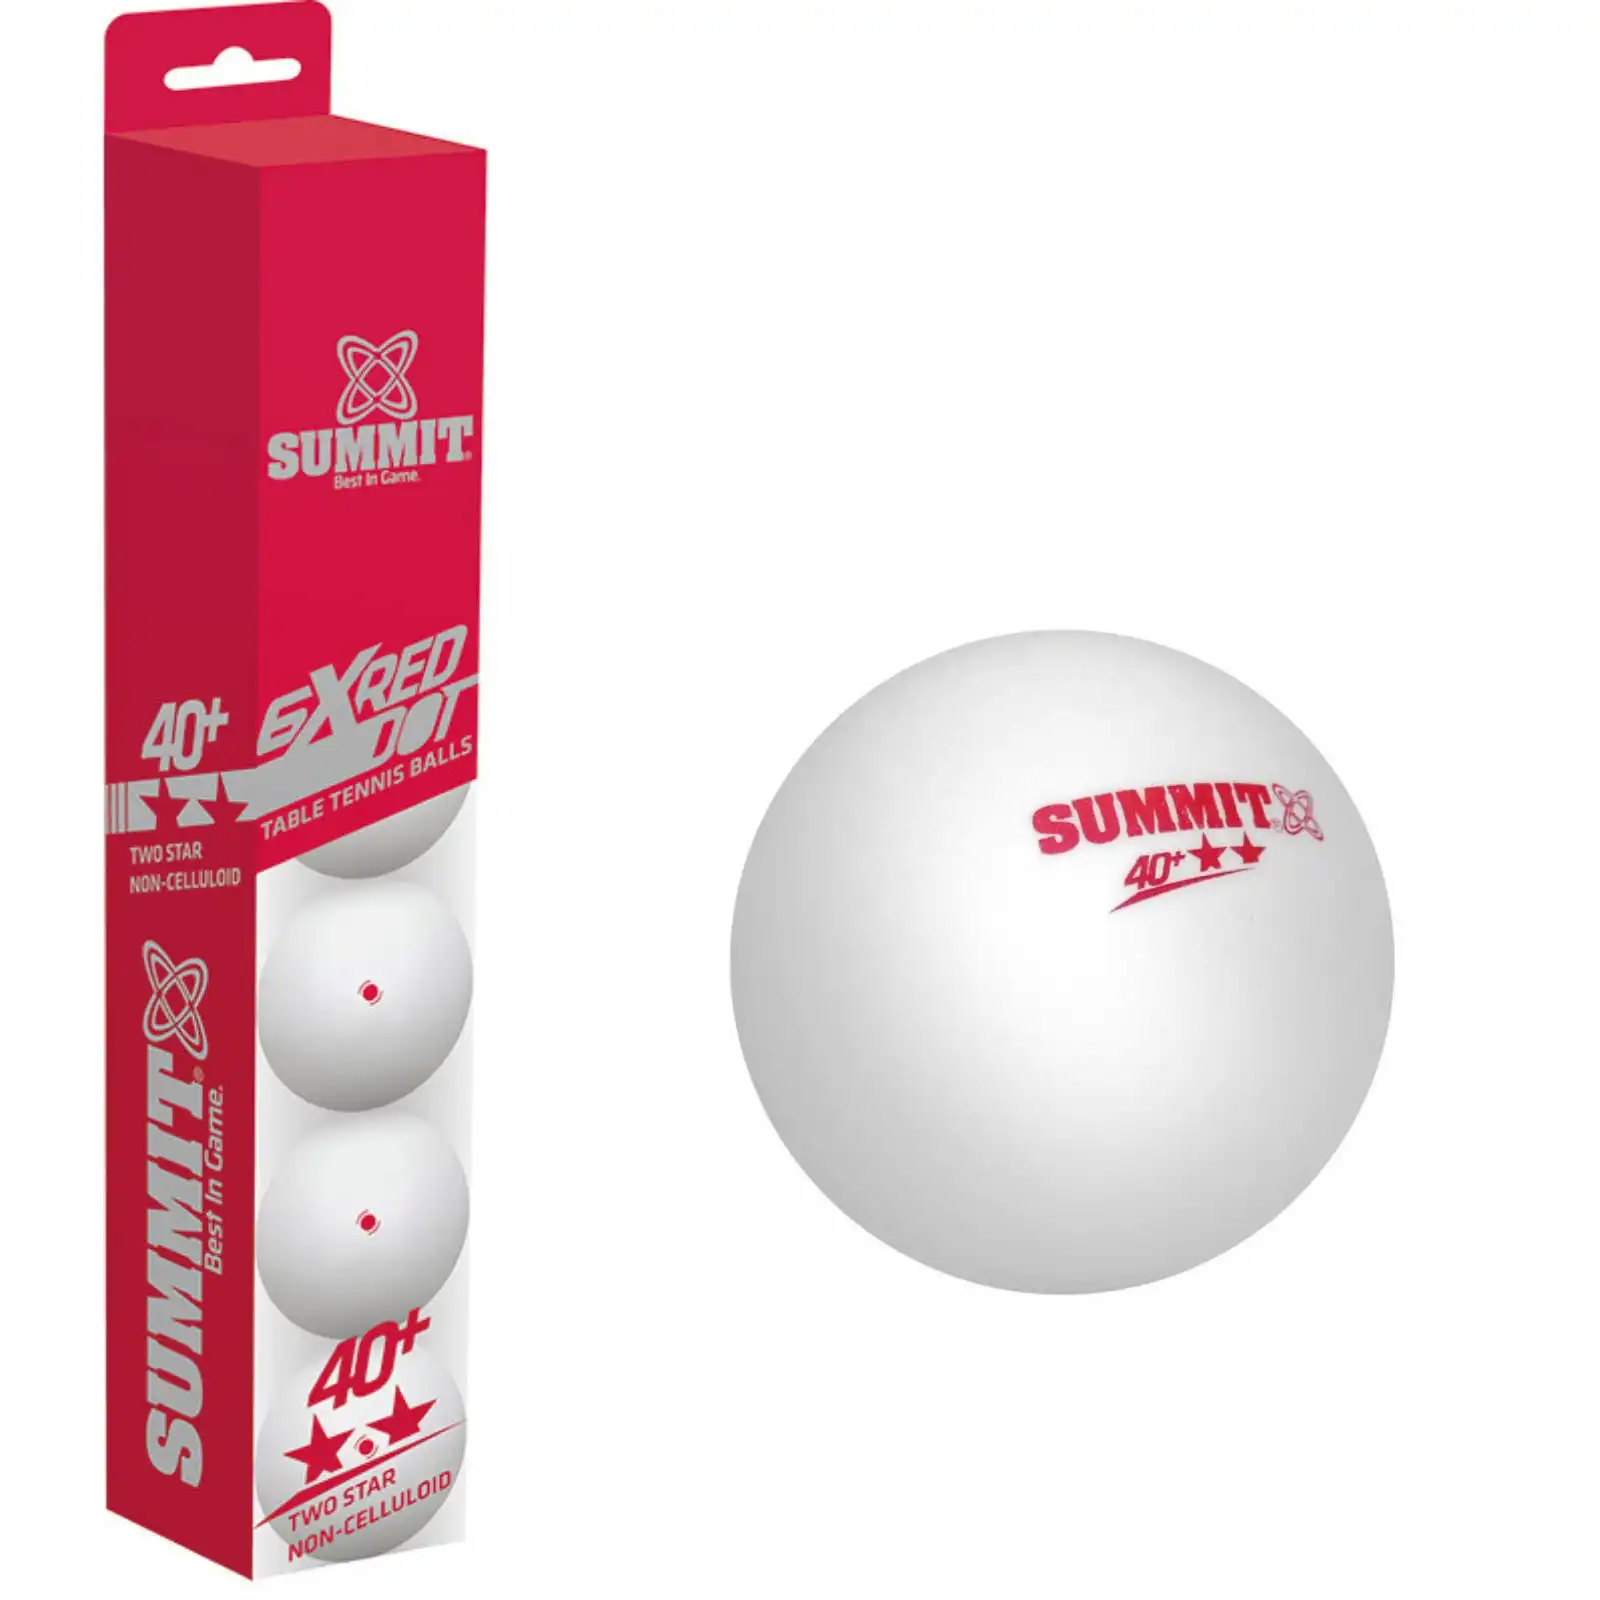 6x Table Tennis Balls 40+ Ping Pong Game Non-Celluloid - 2 Star Red Dot